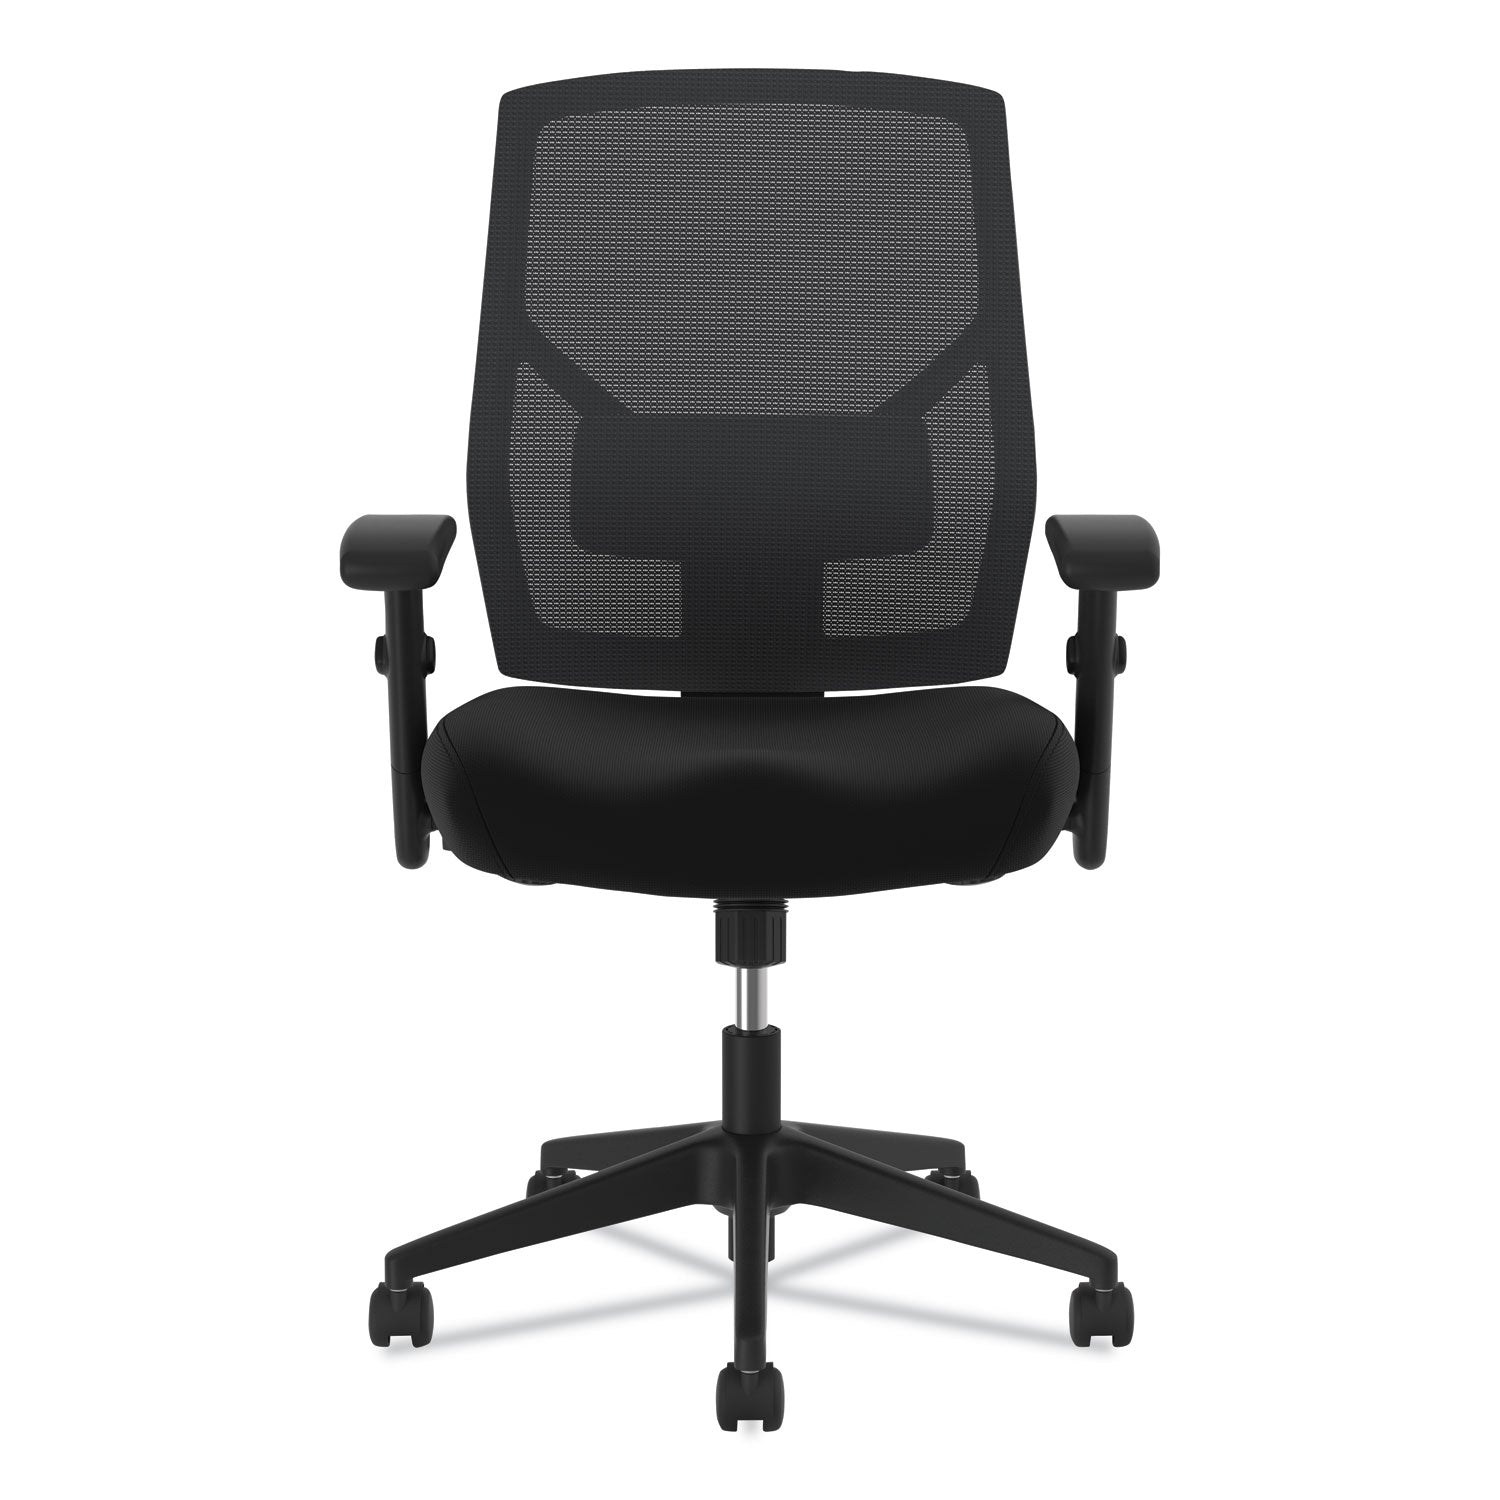 vl581-high-back-task-chair-supports-up-to-250-lb-18-to-22-seat-height-black_bsxvl581es10t - 2